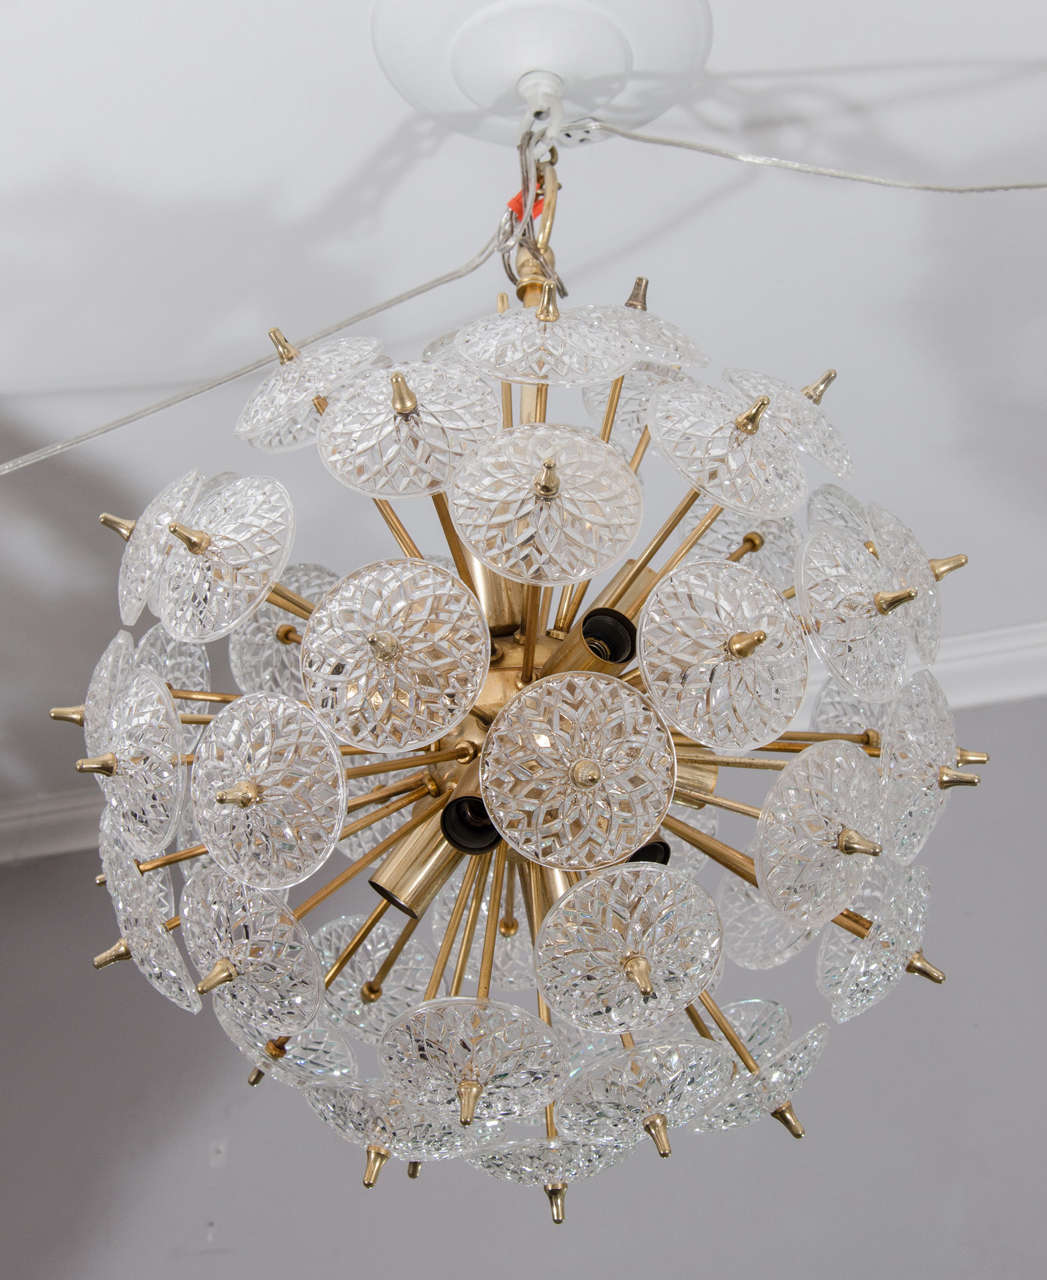 1970s Belgian snowflake glass chandelier in brass finish. Available for immediate purchase.